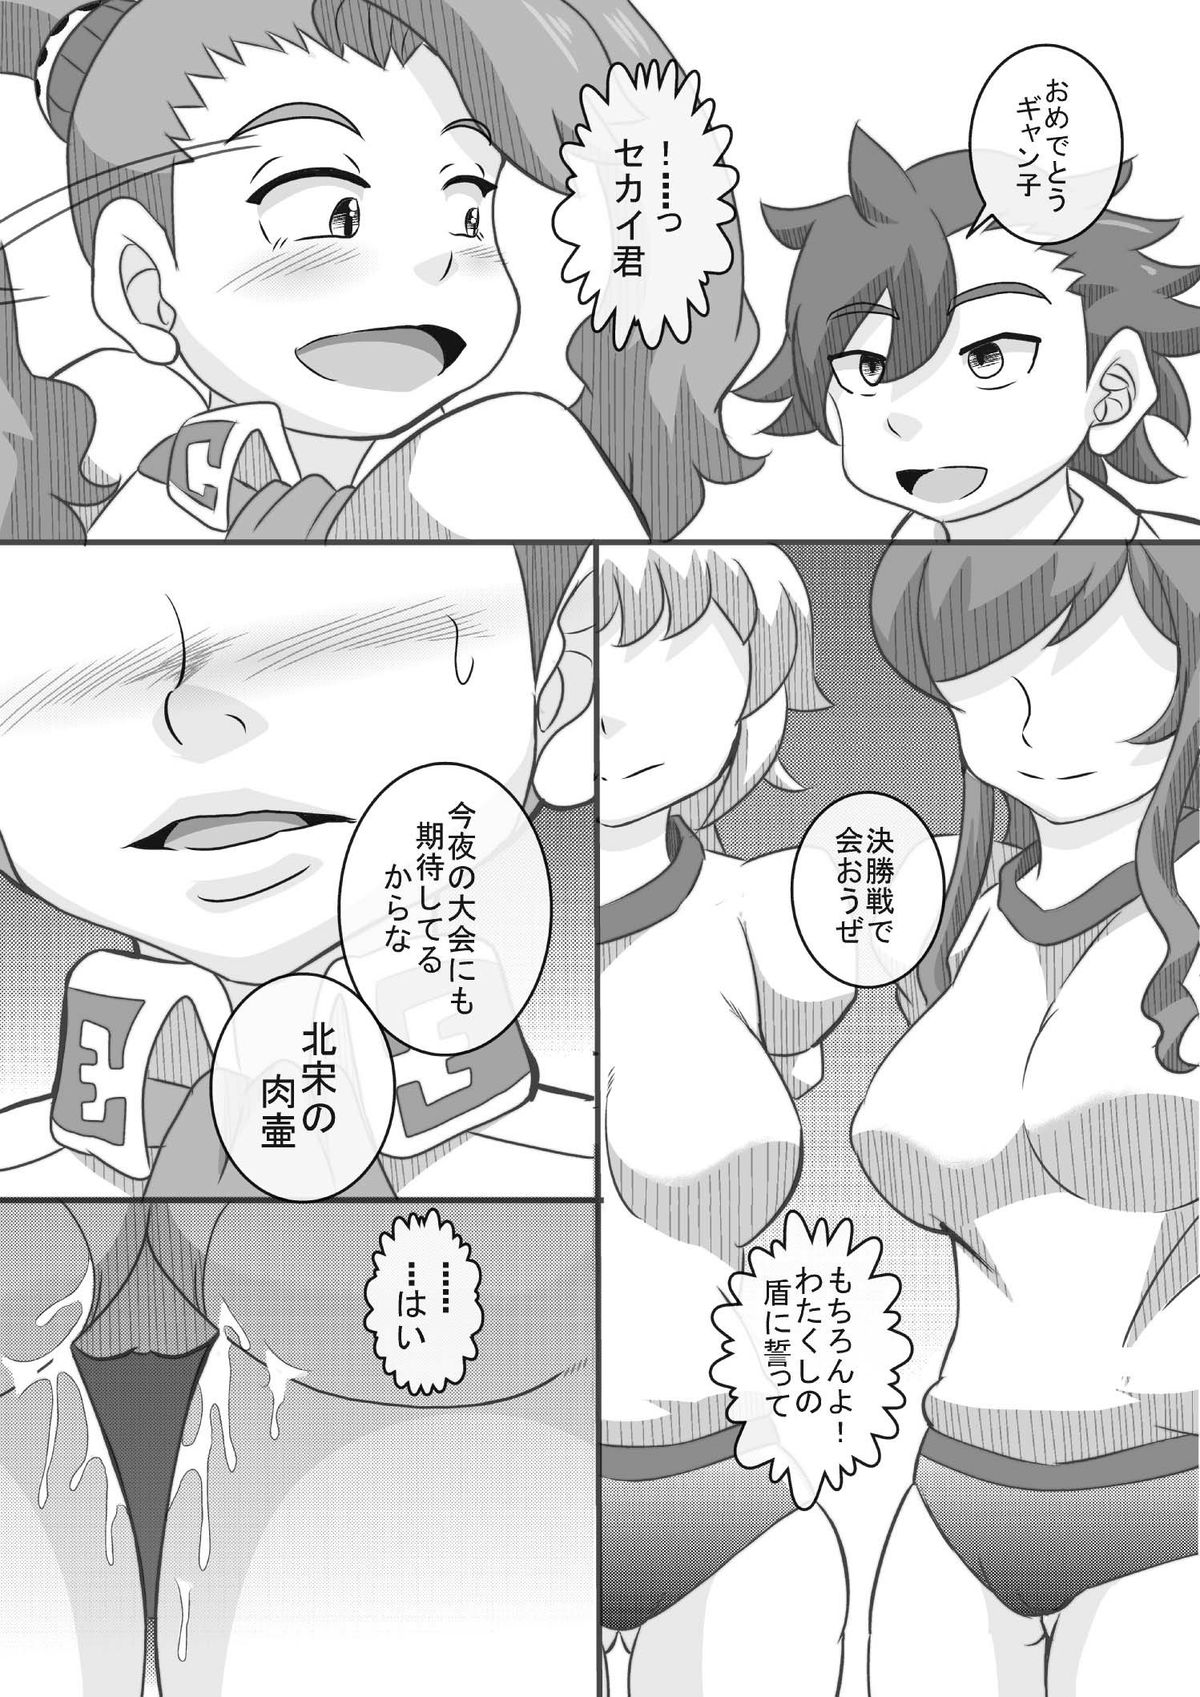 [Seishimentai] Try Nee-chans 2 (Gundam Build Fighters Try) [Digital] page 3 full